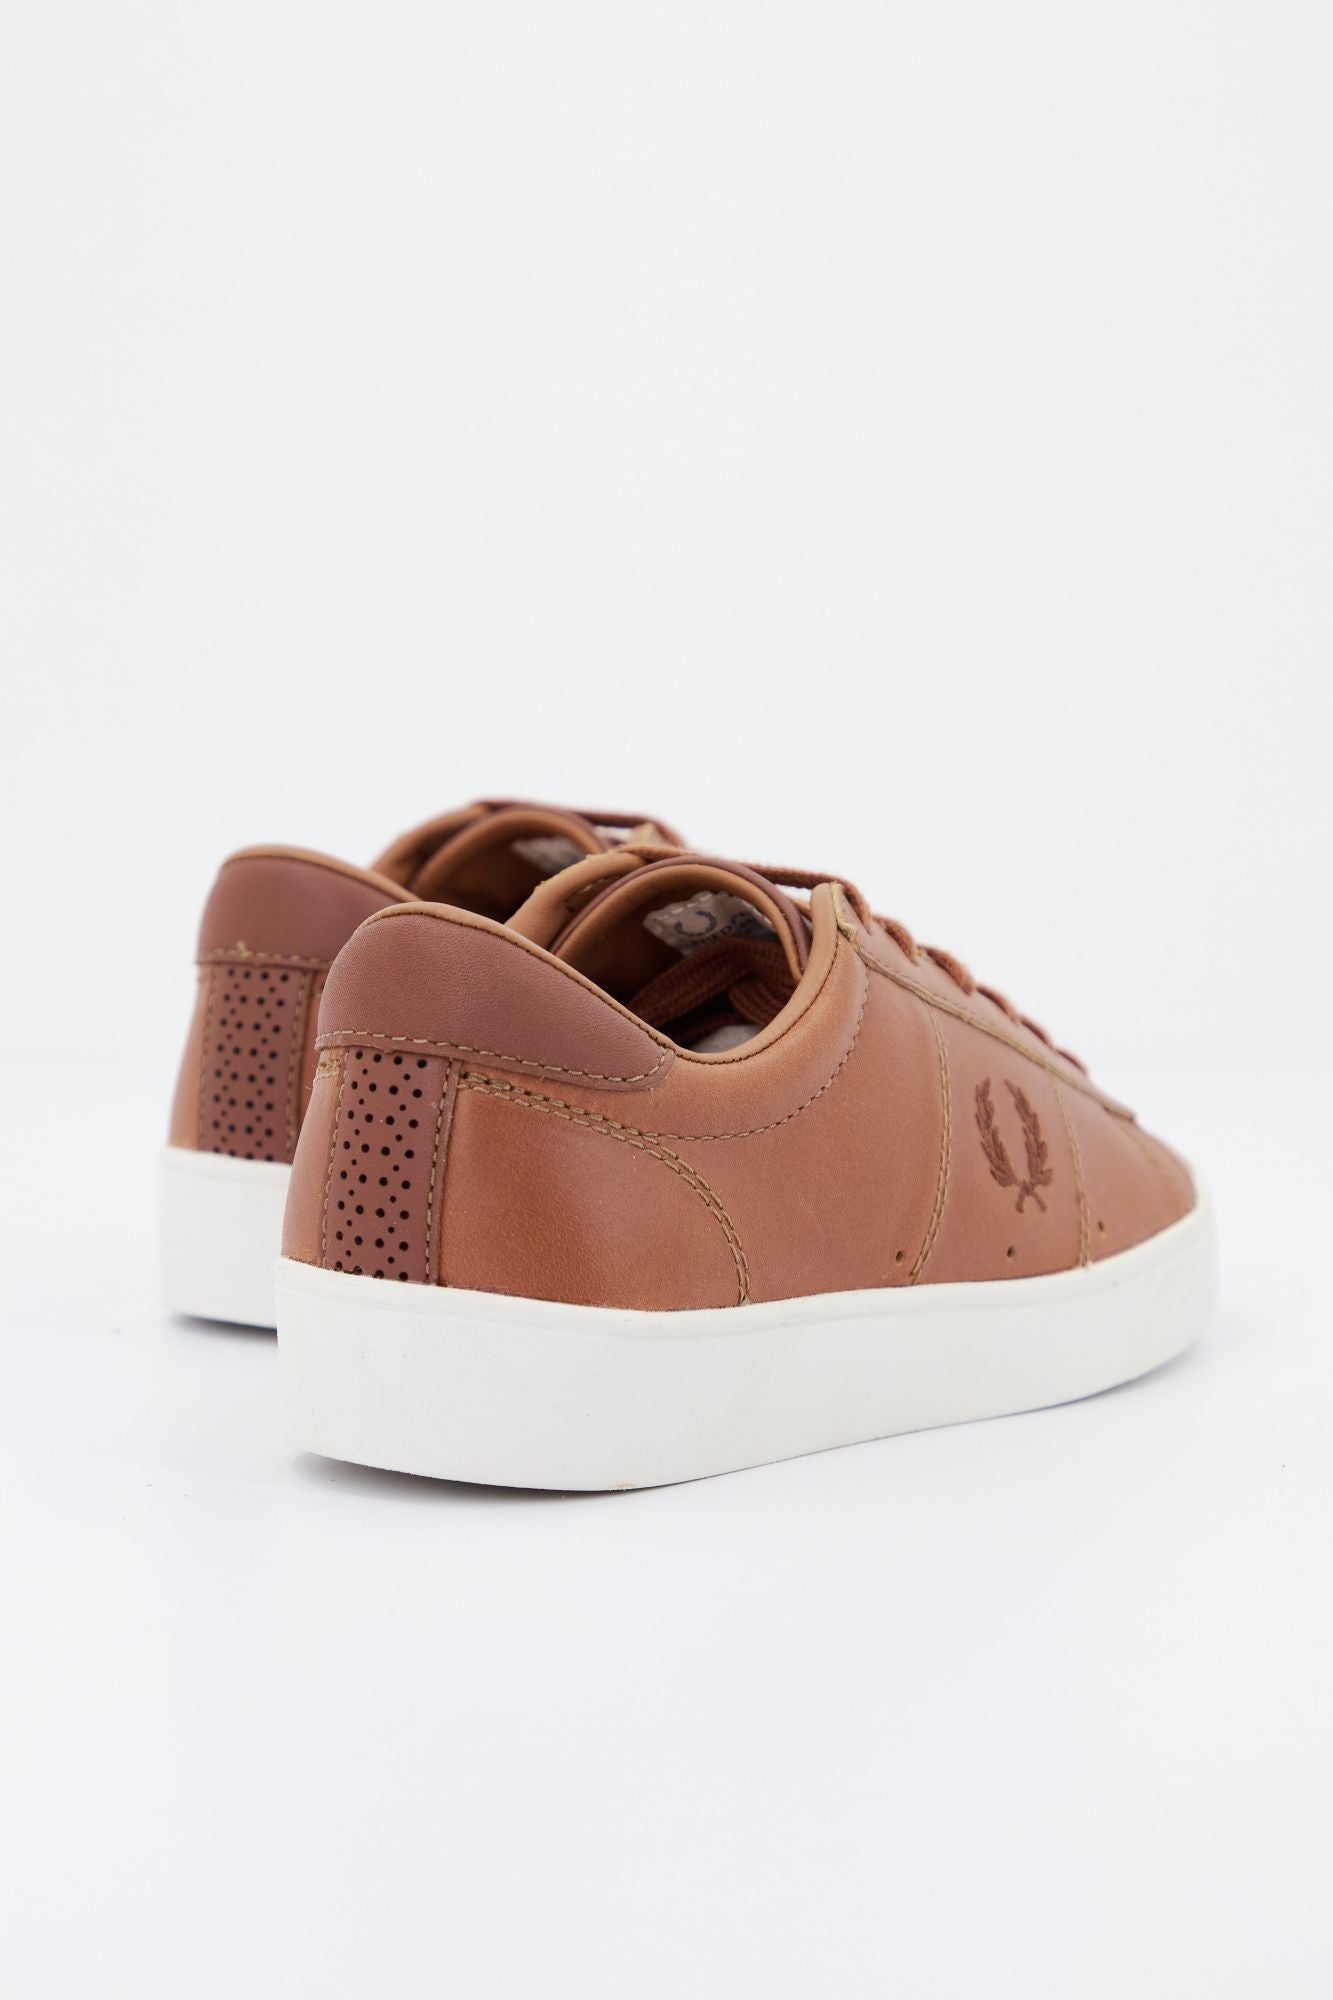 FRED PERRY SPENCER WAXED LEATH en color MARRON (3)